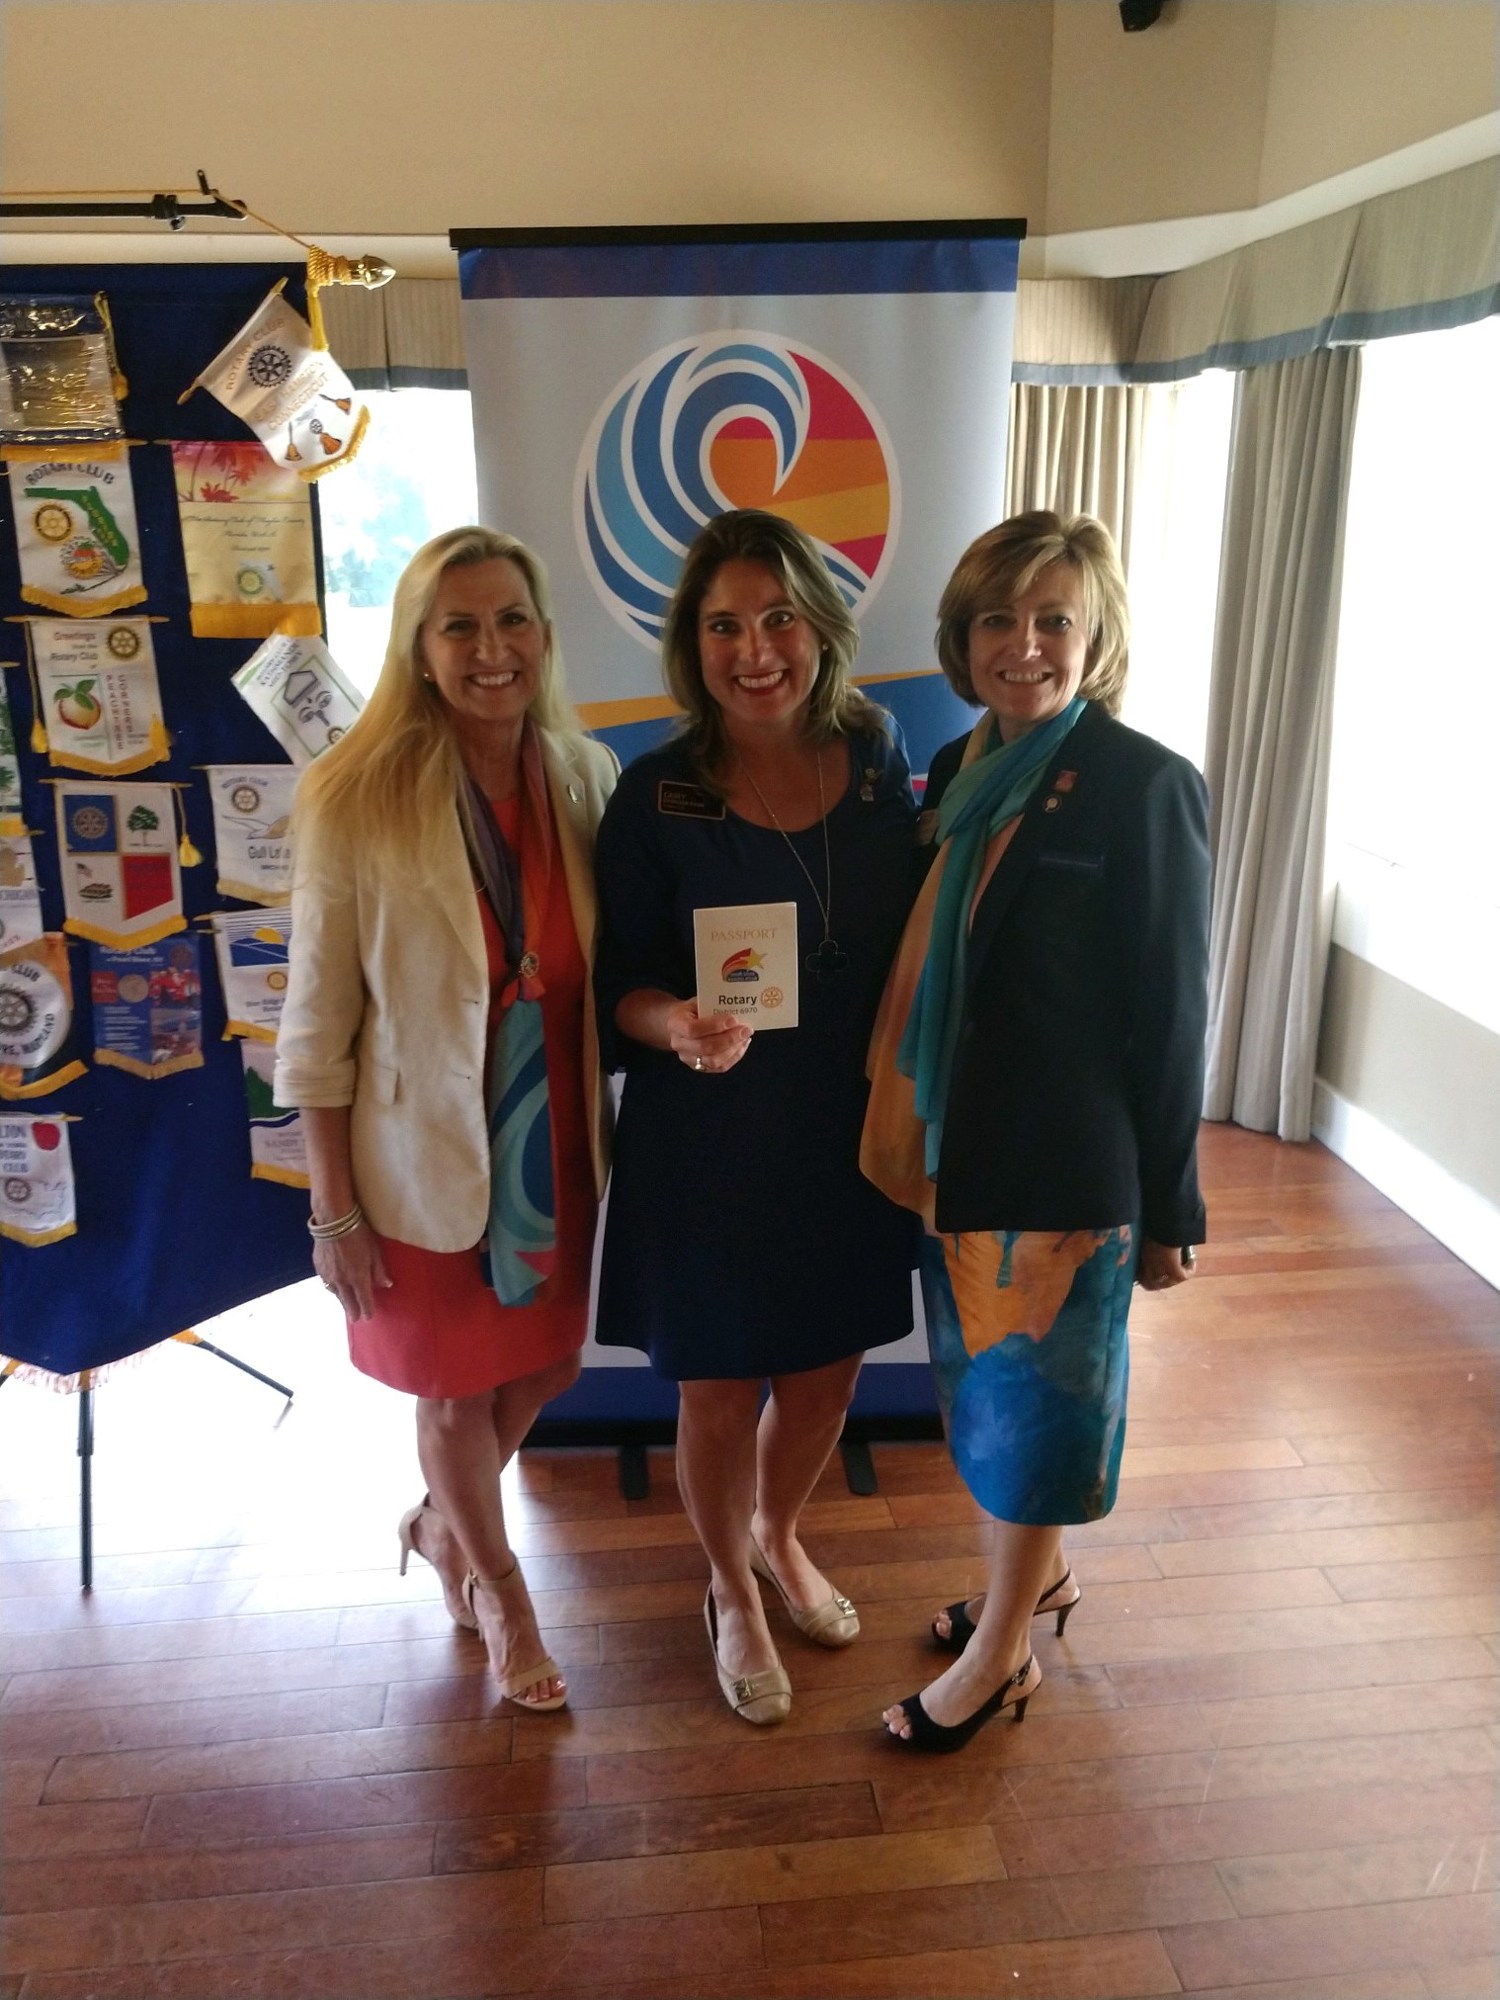 Rotary Club of Flagler County President Cindy Evans, Rising Star award recipient Casey Ryan and Rotary District 6970’s Governor Jeanette Loftus. Courtesy photo